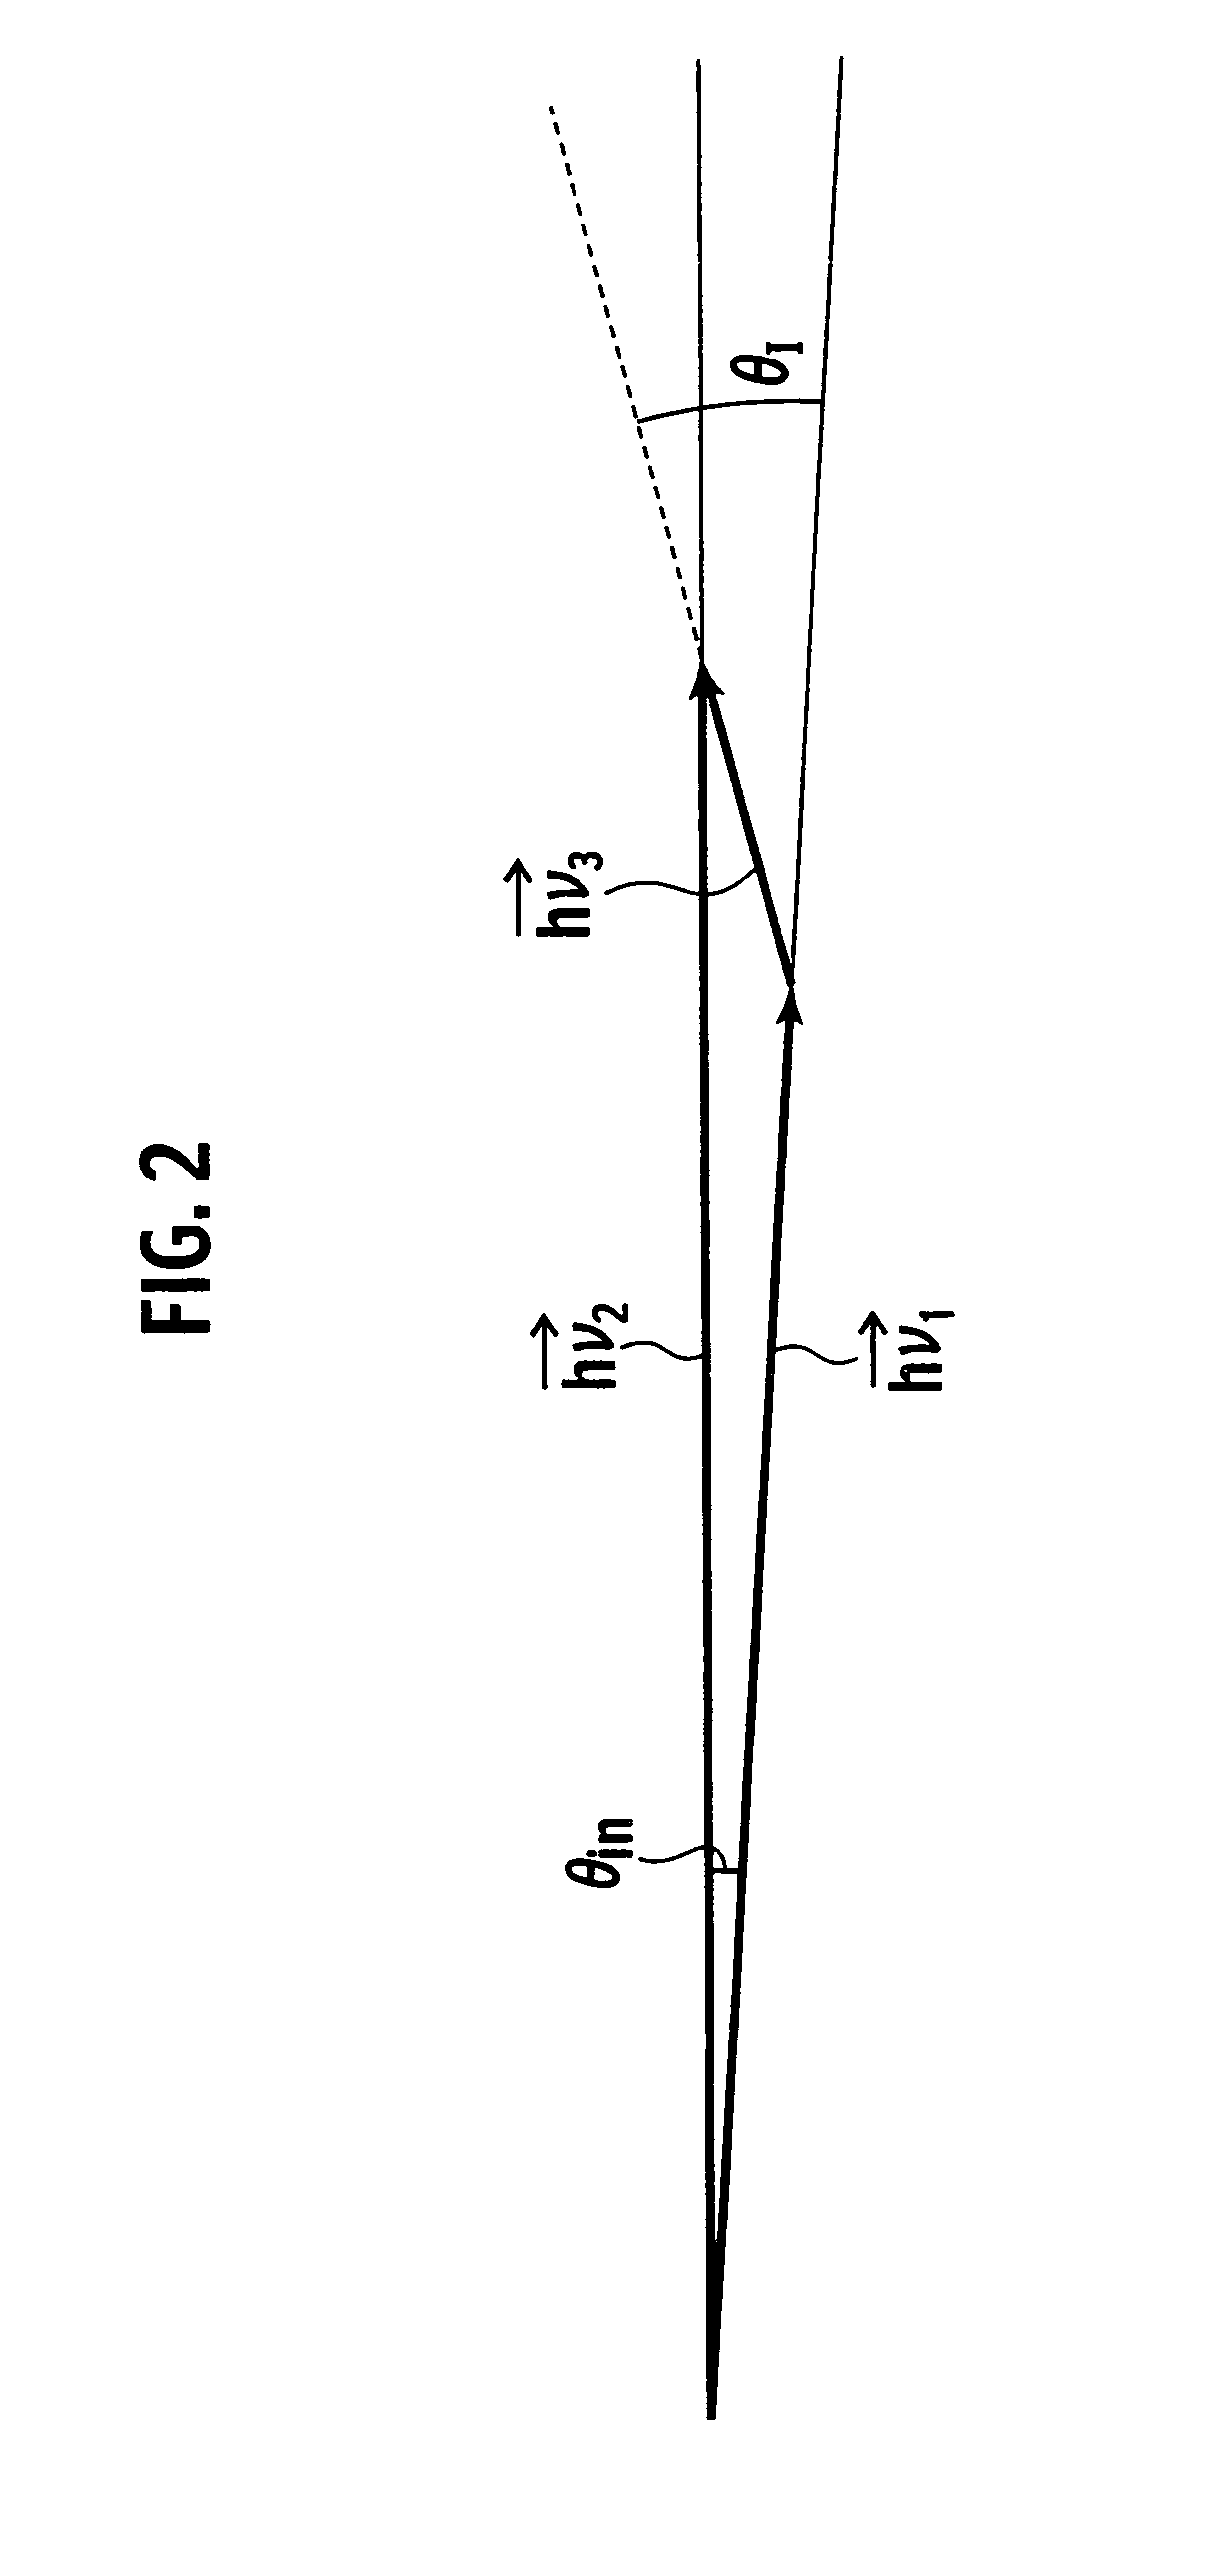 Electromagnetic wave generating device